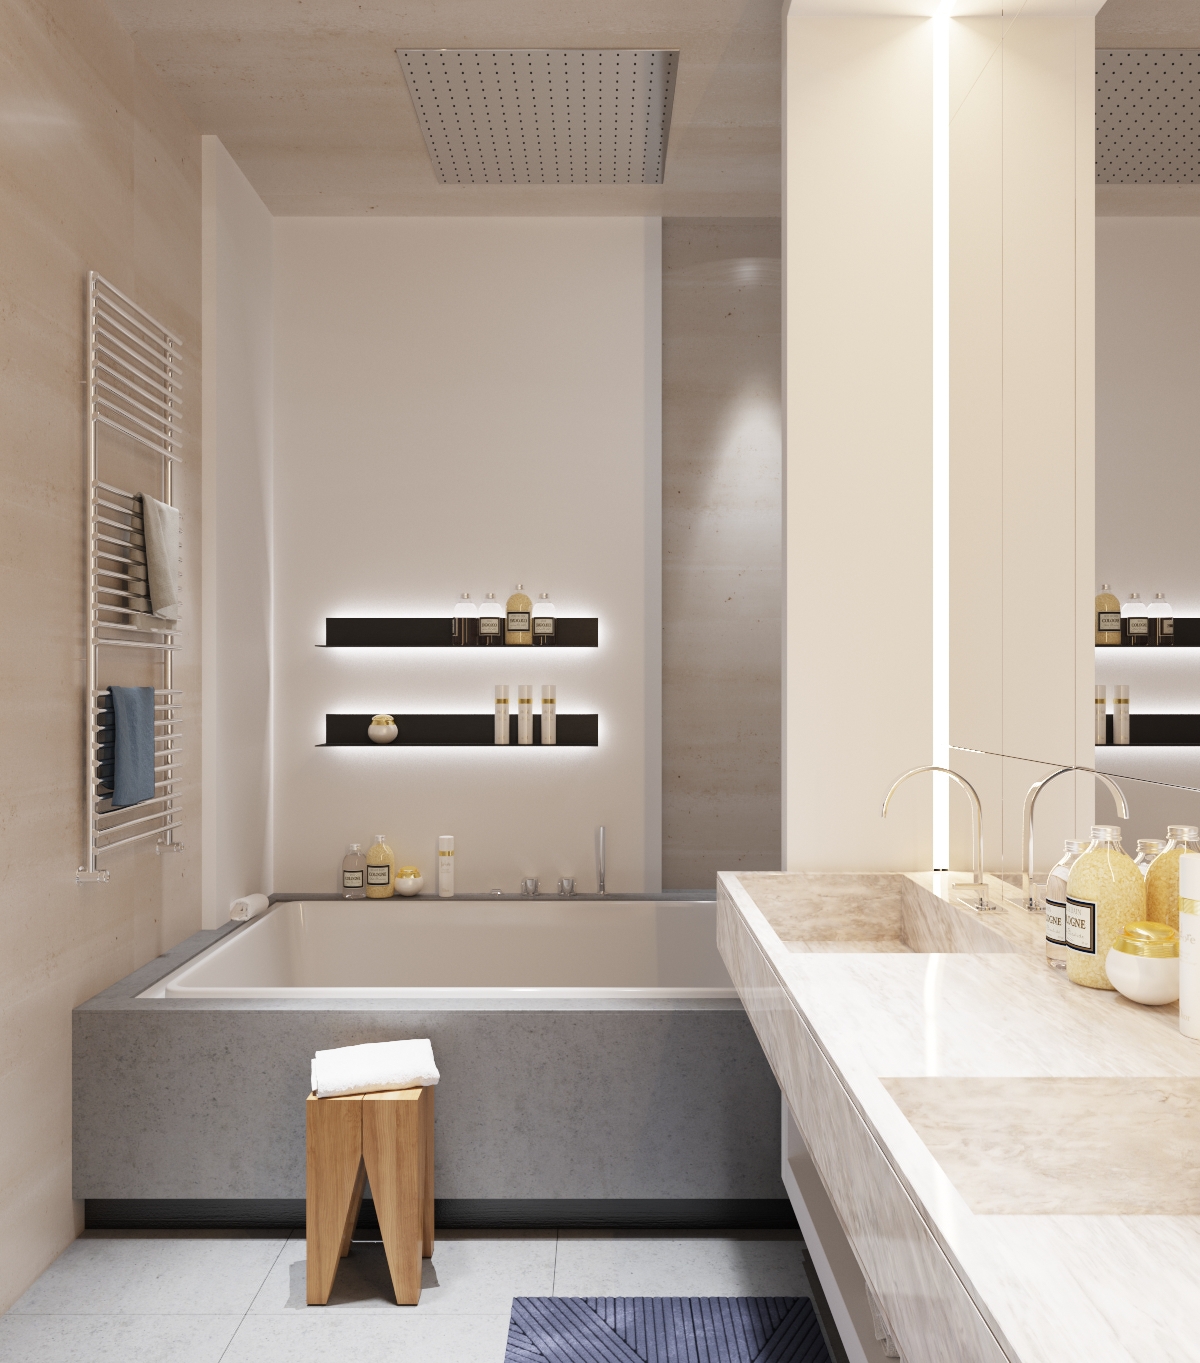 simple bathroom design "width =" 1200 "height =" 1363 "srcset =" https://mileray.com/wp-content/uploads/2020/05/1588515638_869_Small-Minimalist-Bathroom-Designs-Decorated-With-Variety-of-Modern-Pattern.jpg 1200w, https://mileray.com/ wp -content / uploads / 2016/10 / Artem-Trigubchak2-264x300.jpg 264w, https://mileray.com/wp-content/uploads/2016/10/Artem-Trigubchak2-768x872.jpg 768w, https: // myfashionos .com / wp-content / uploads / 2016/10 / Artem-Trigubchak2-902x1024.jpg 902w, https://mileray.com/wp-content/uploads/2016/10/Artem-Trigubchak2-696x791.jpg 696w, https : //mileray.com/wp-content/uploads/2016/10/Artem-Trigubchak2-1068x1213.jpg 1068w, https://mileray.com/wp-content/uploads/2016/10/Artem-Trigubchak2-370x420. jpg 370w "sizes =" (maximum width: 1200px) 100vw, 1200px